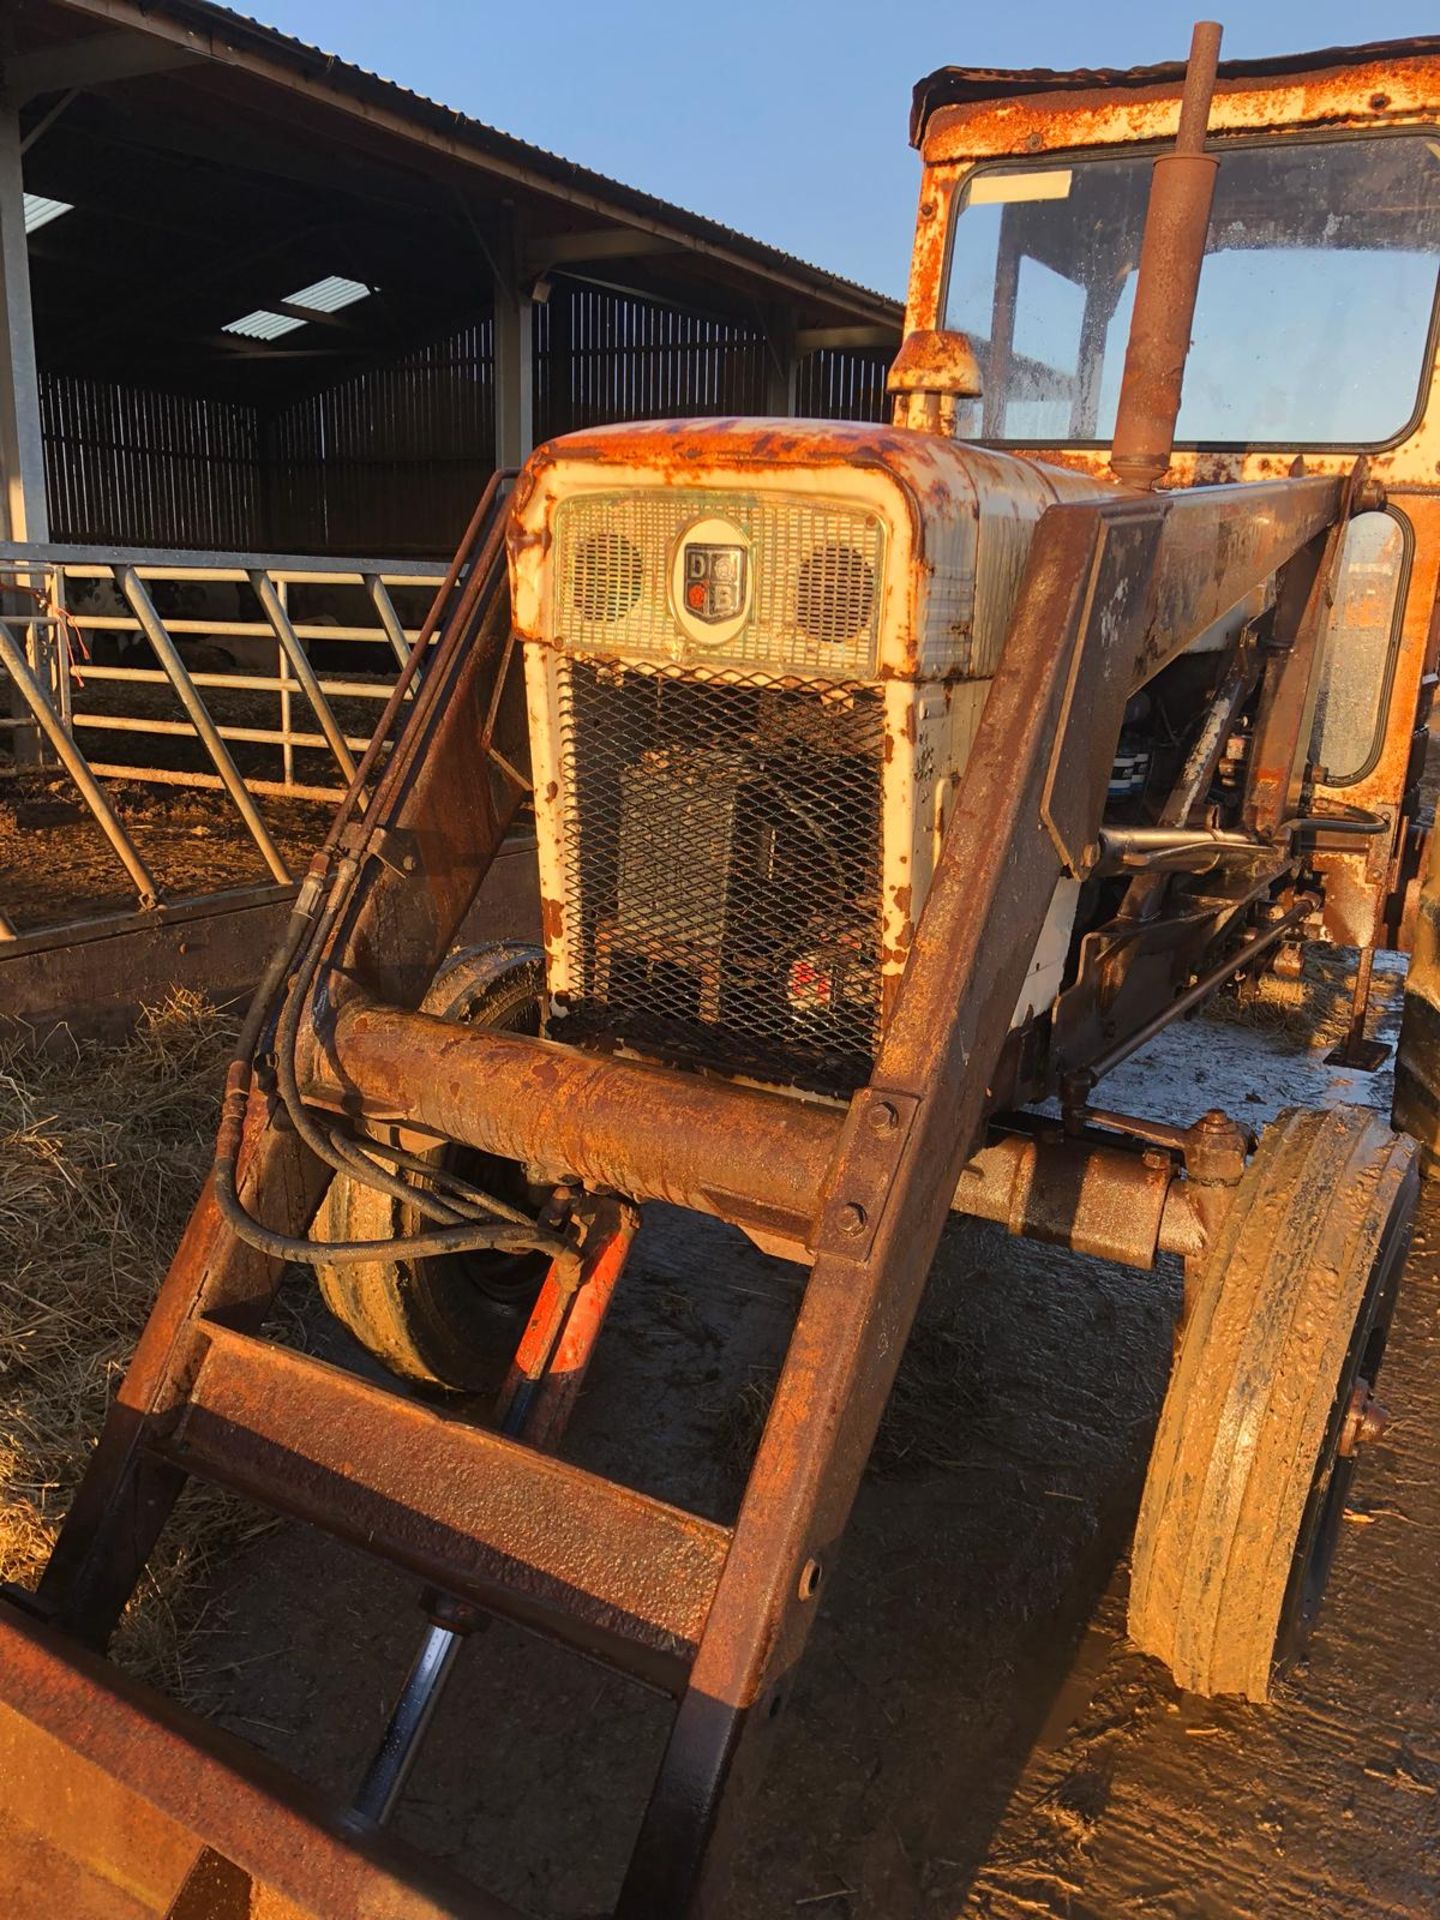 1971 DAVID BROWN 1200 TRACTOR, STARTS WITH A JUMP PACK, DRIVES AND LIFTS *PLUS VAT* - Image 14 of 16